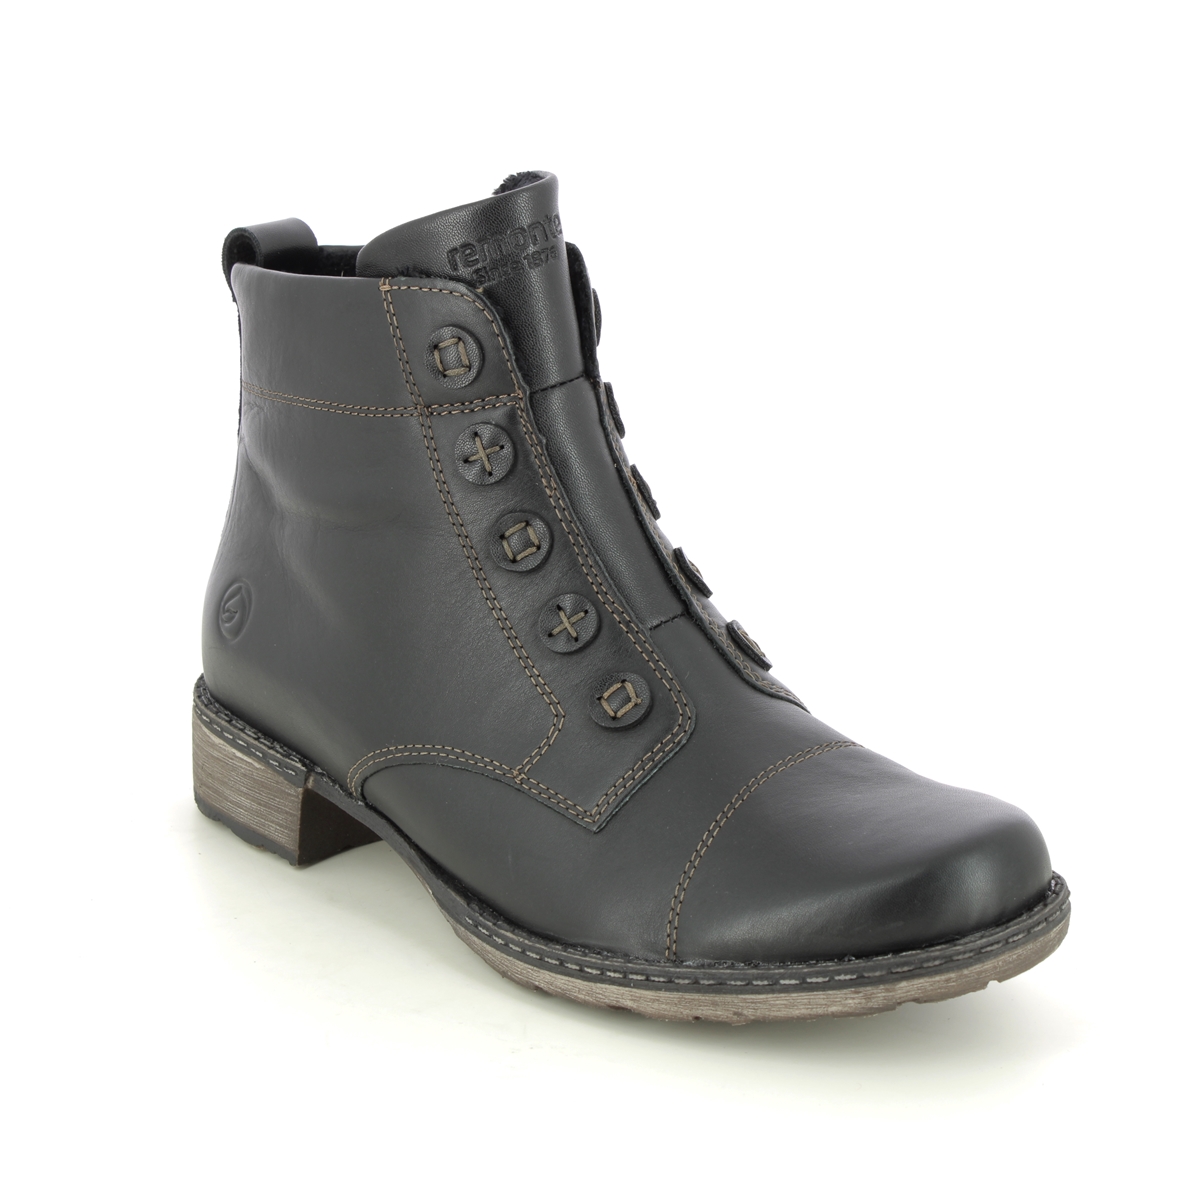 Remonte Peesibut Black Leather Womens Ankle Boots D4392-01 In Size 40 In Plain Black Leather